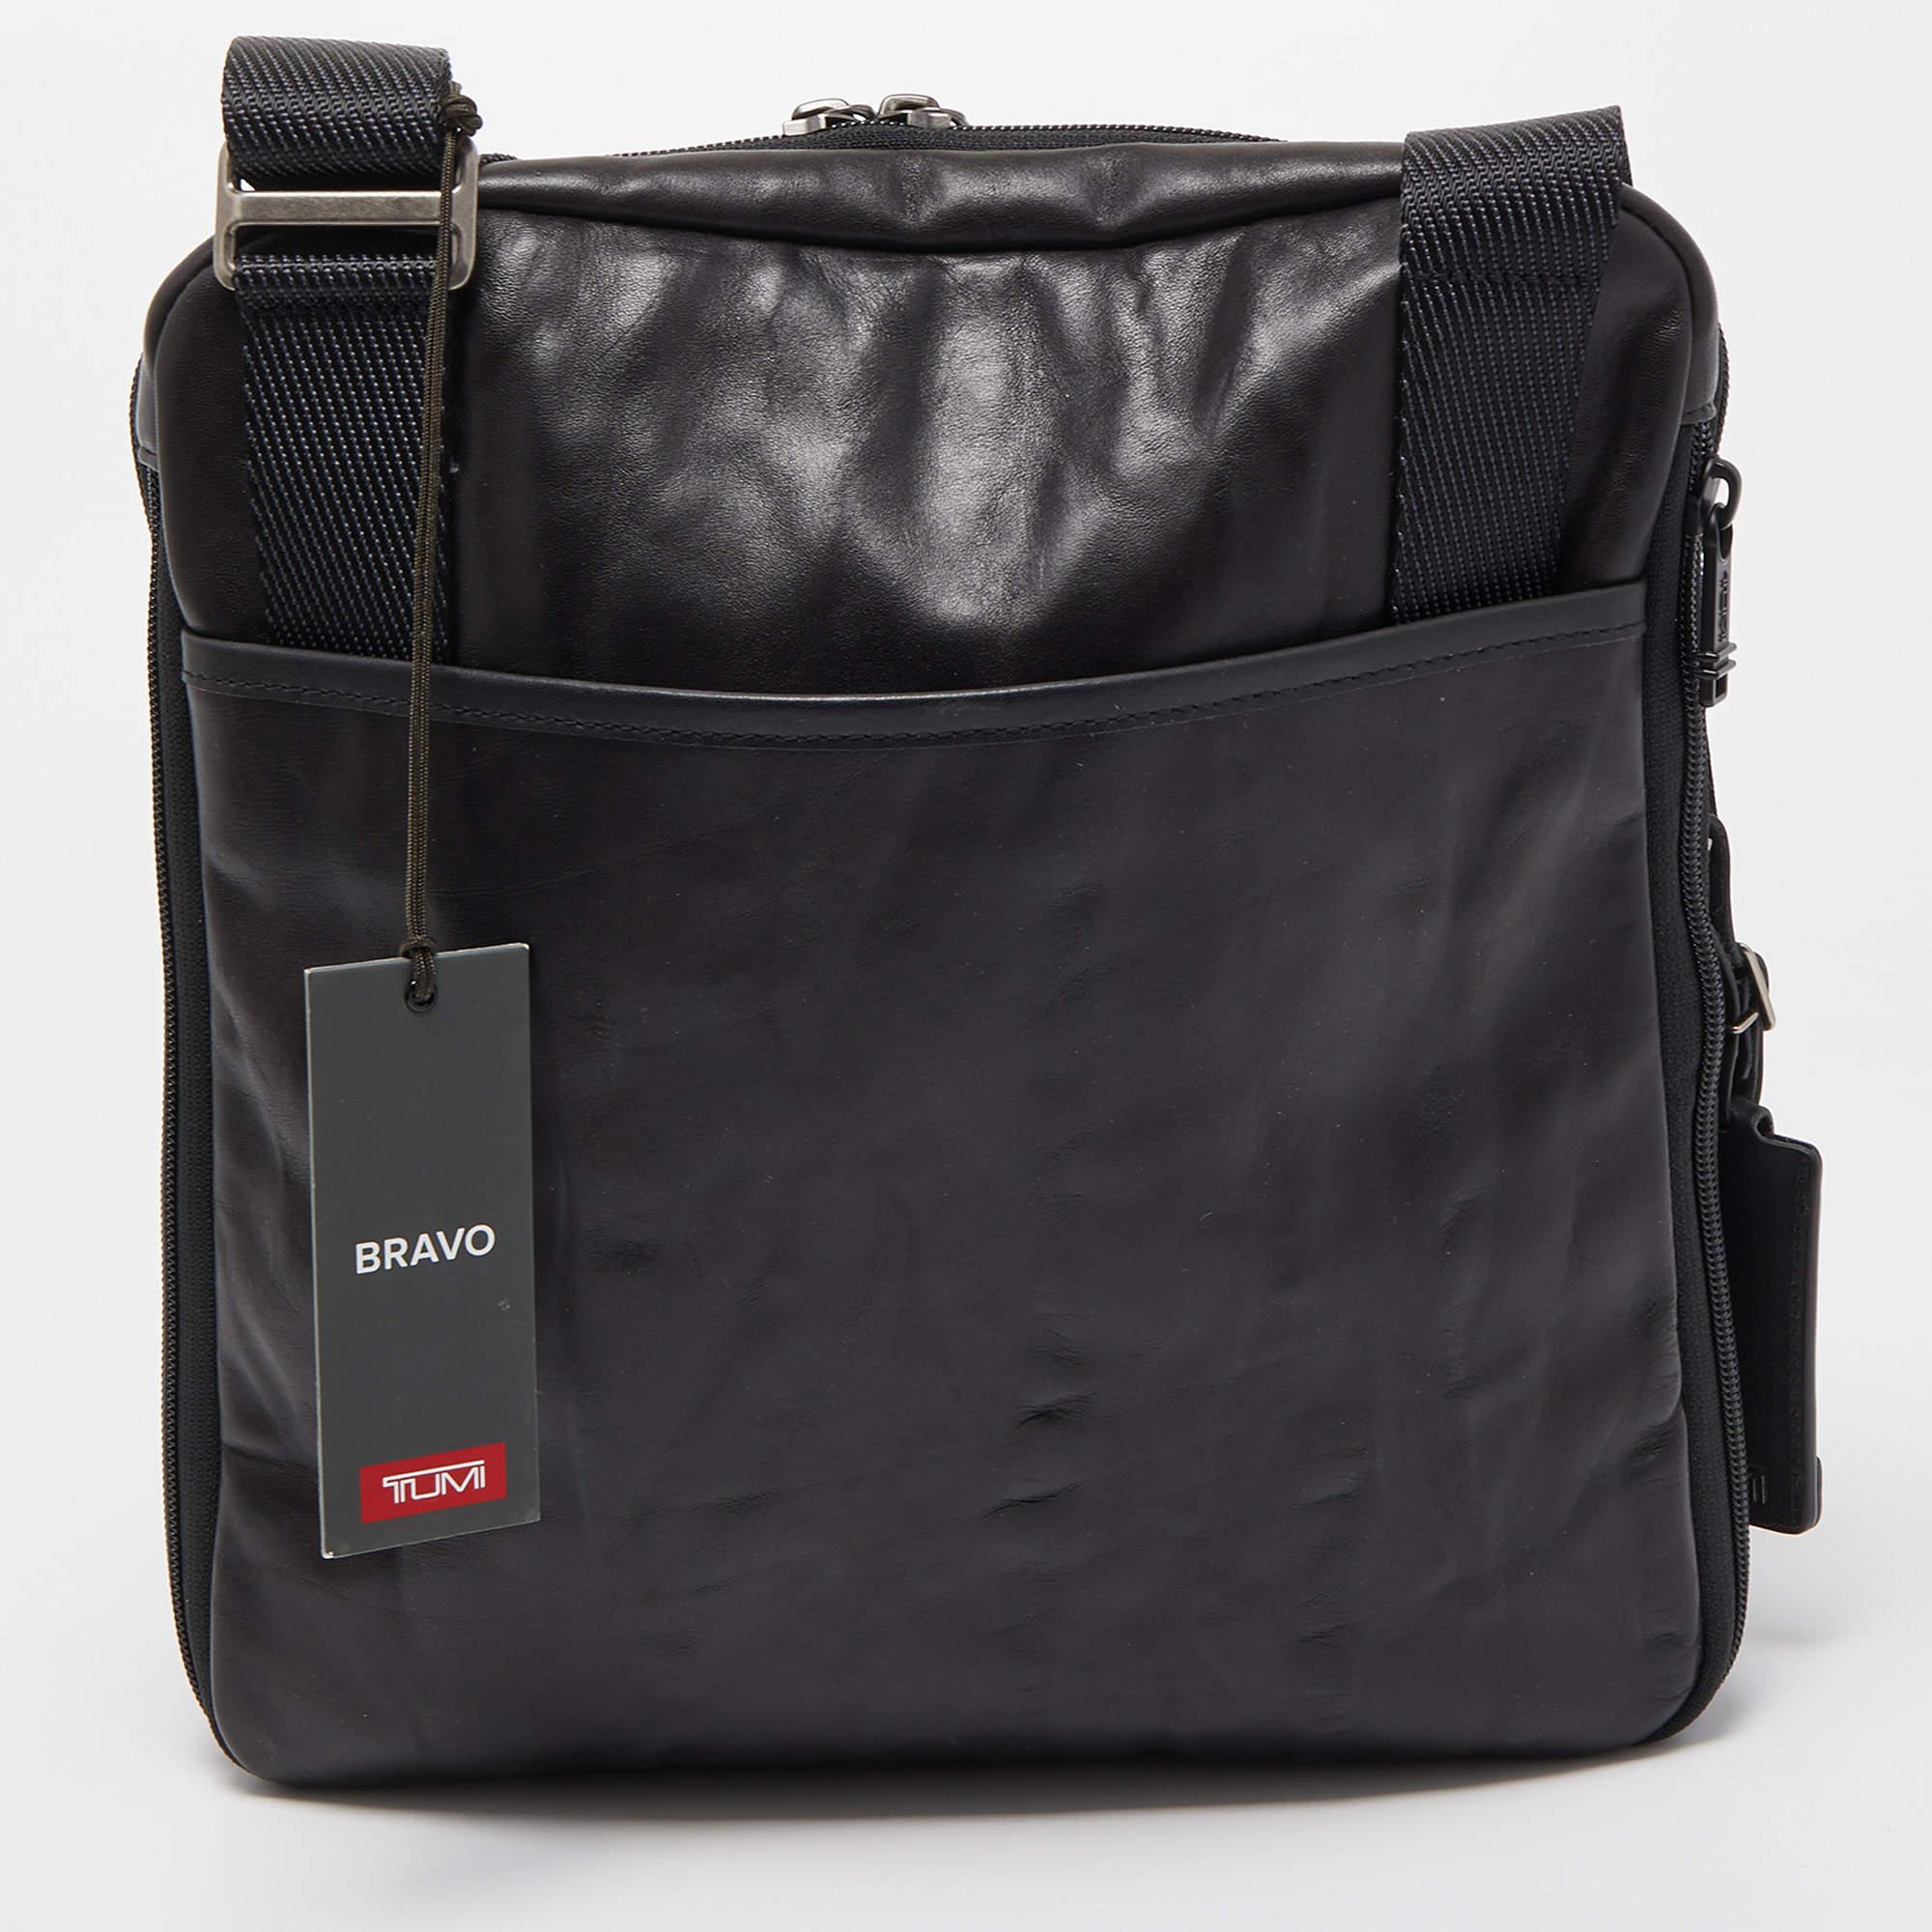 Trust Tumi messenger bags to offer functional ease and a comfortable carrying experience. Smartly designed, the bag has an appealing exterior and a spacious interior. Perfect for work, downtown roves, and even weekend getaways.

Includes: tag,